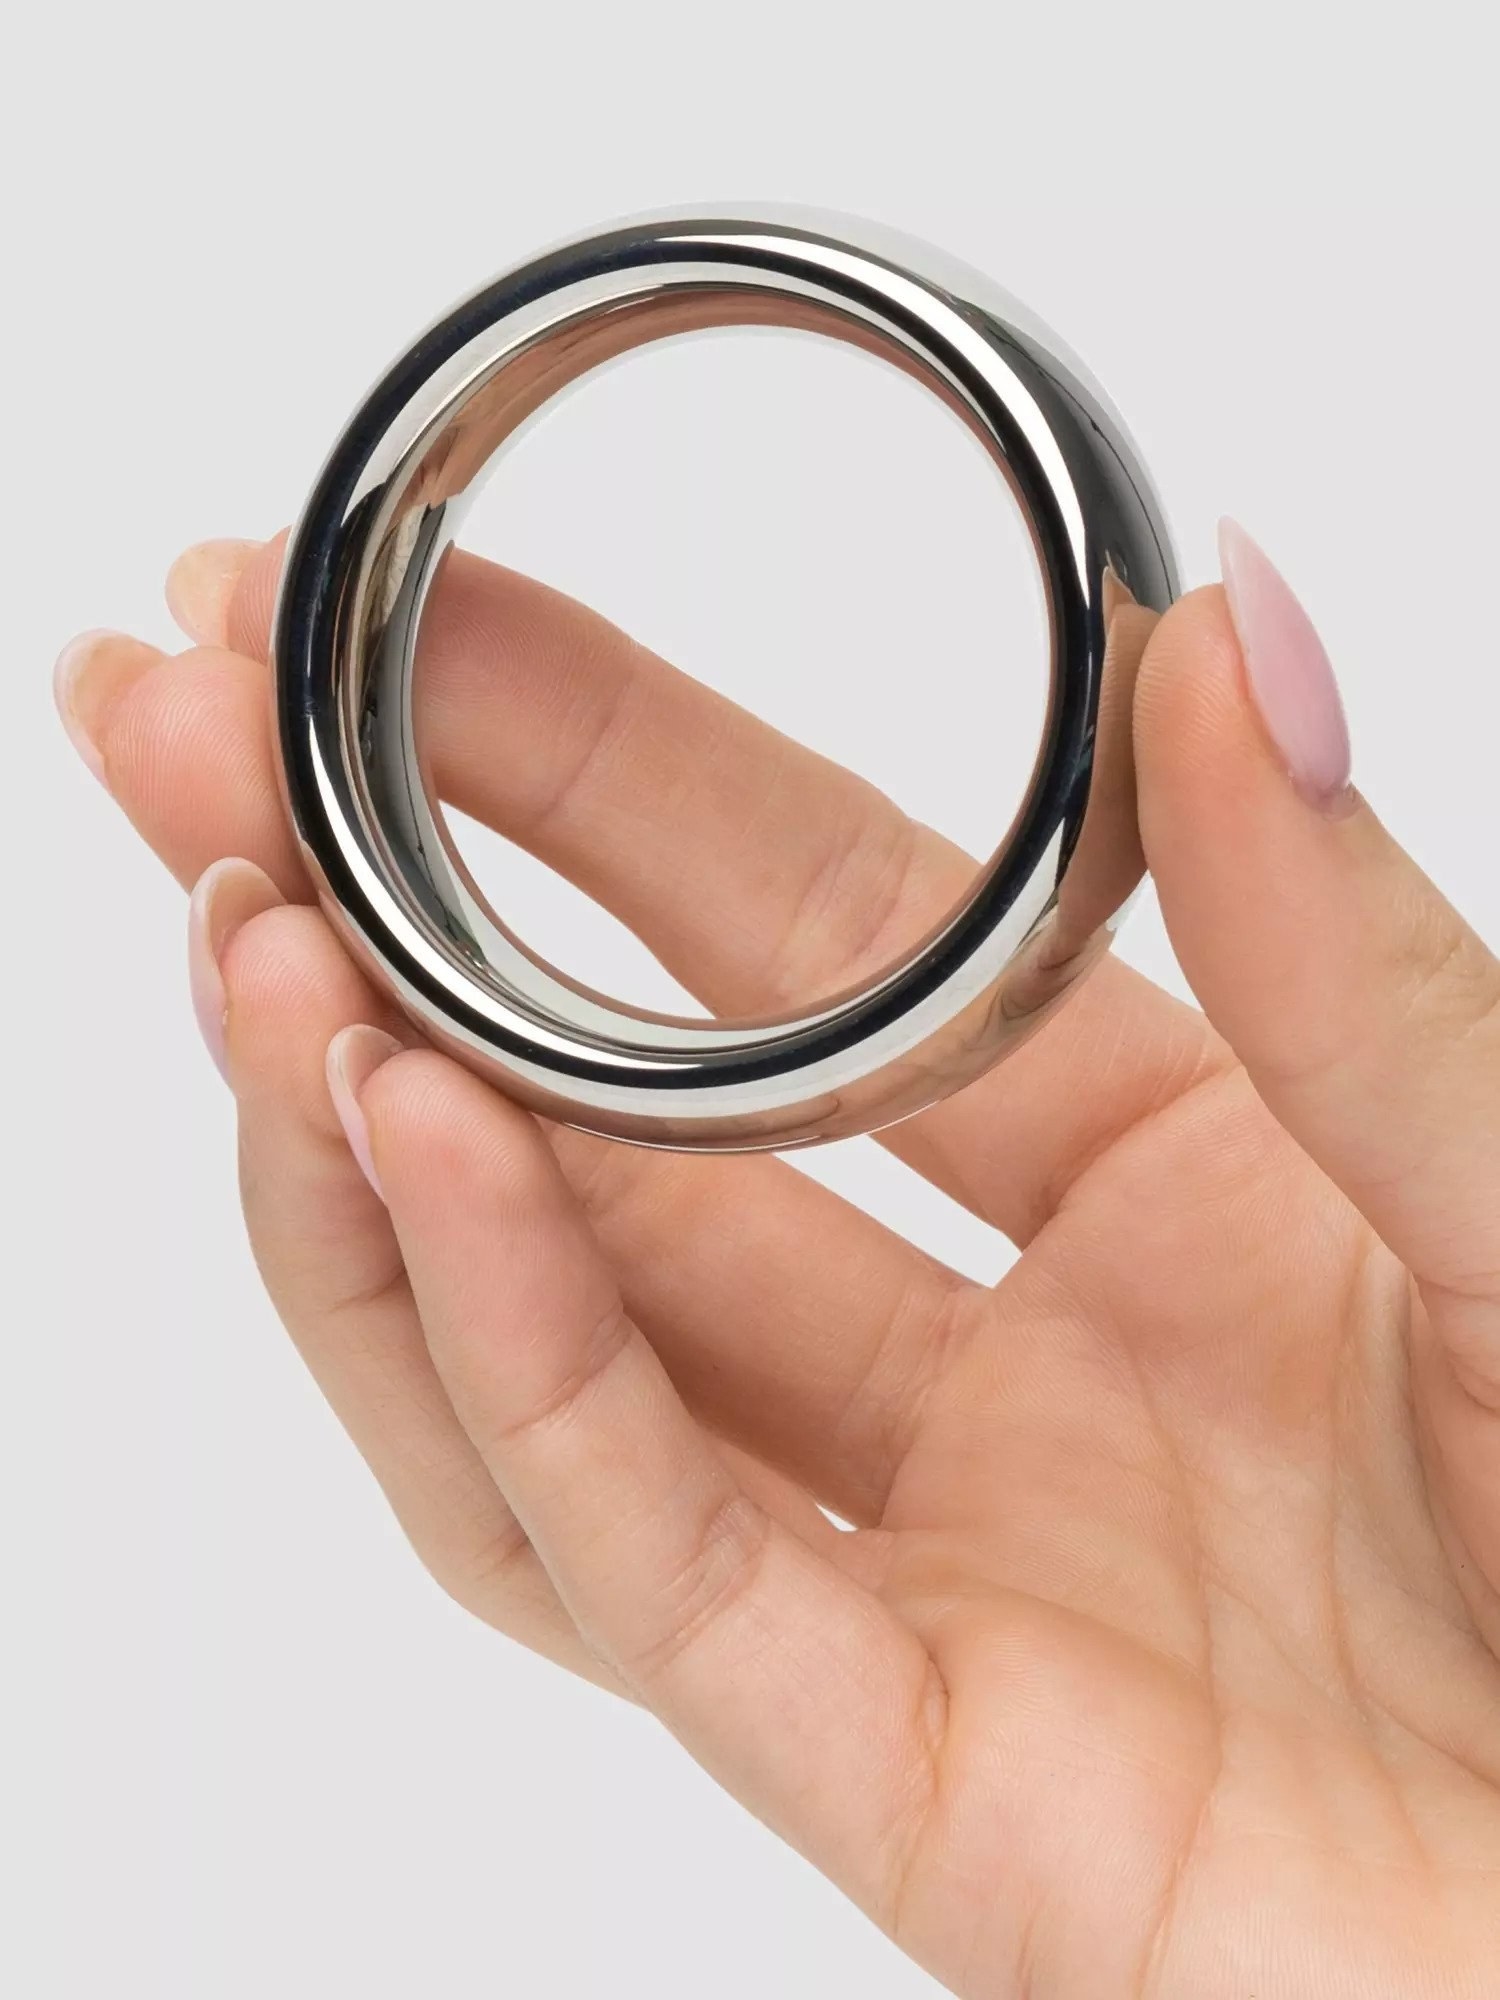 Model holding stainless steel cock ring